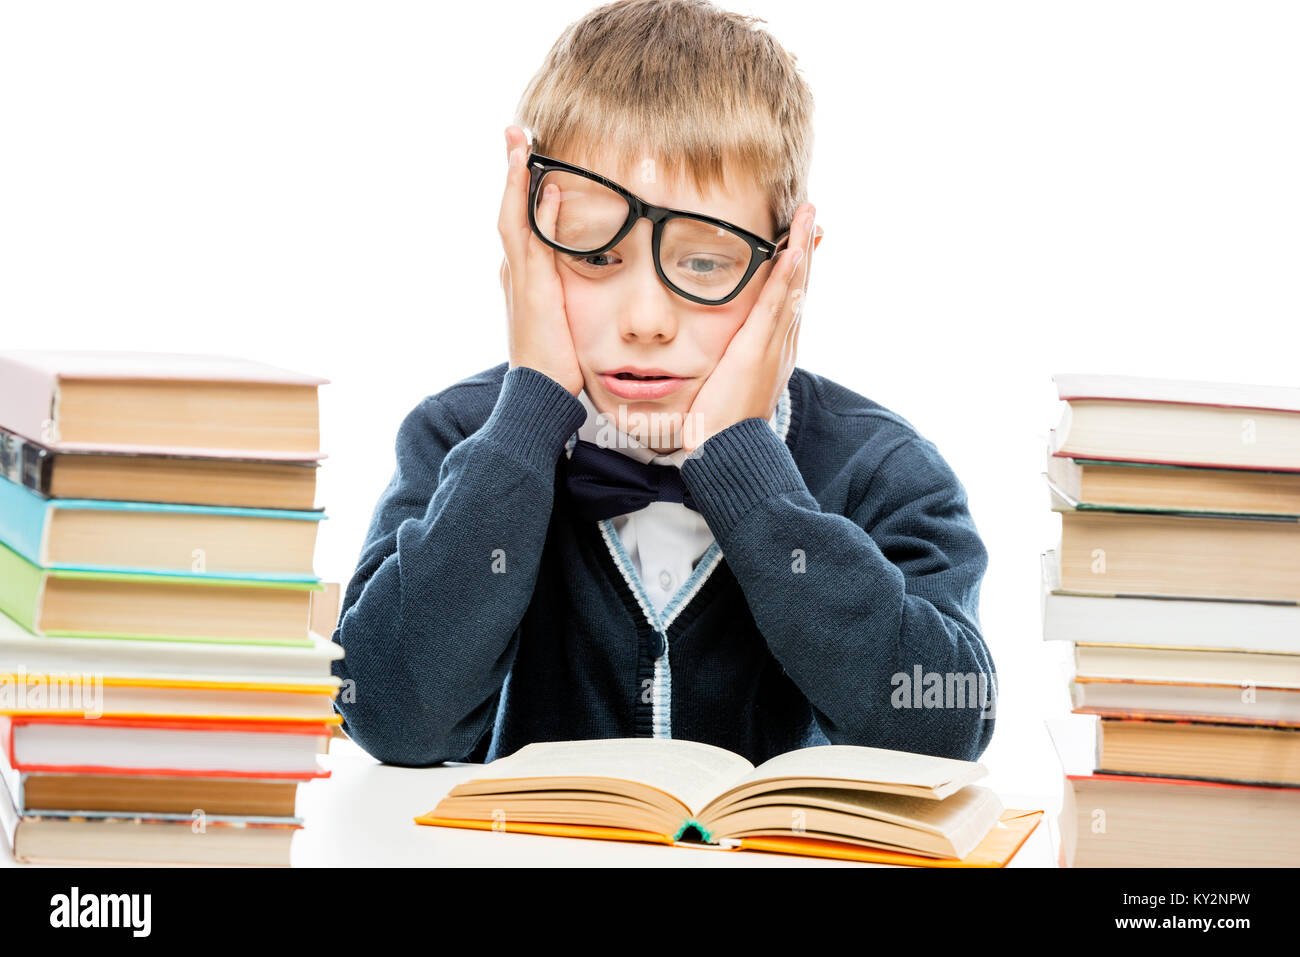 discouraged schoolboy among a pile of books on a white background Stock Photo